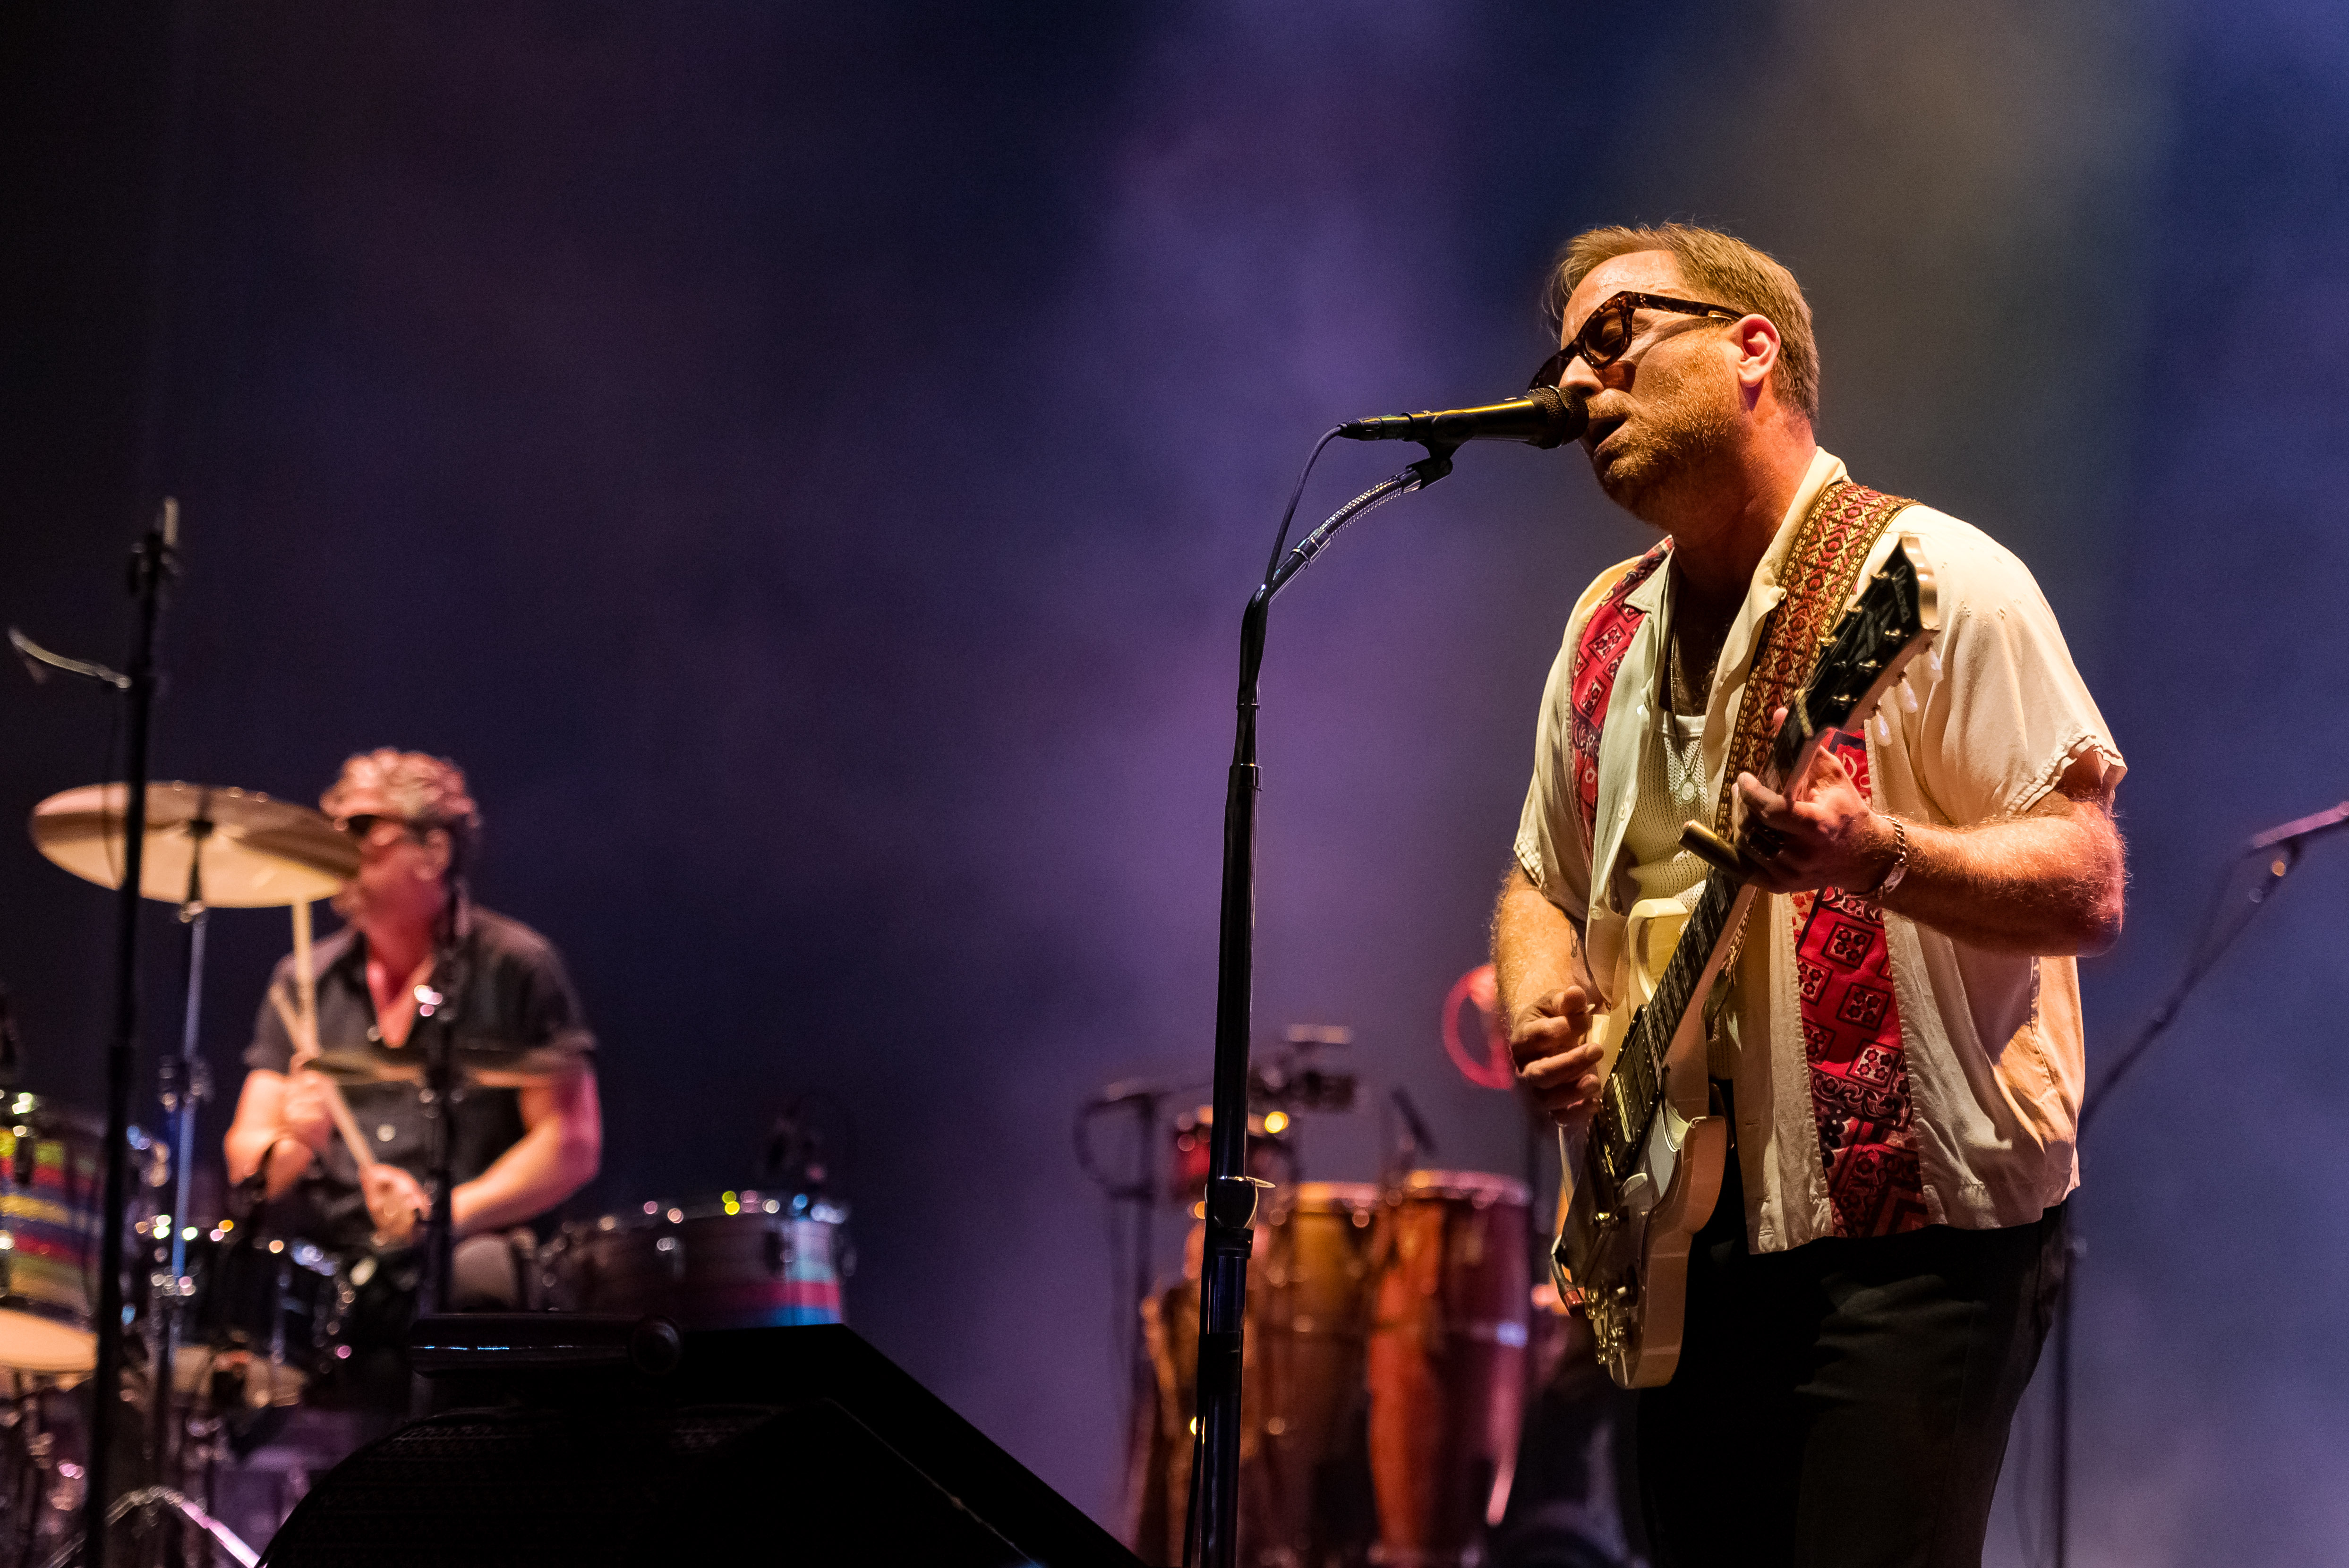 The Black Keys cancelled their US tour amid claims of poor ticket sales